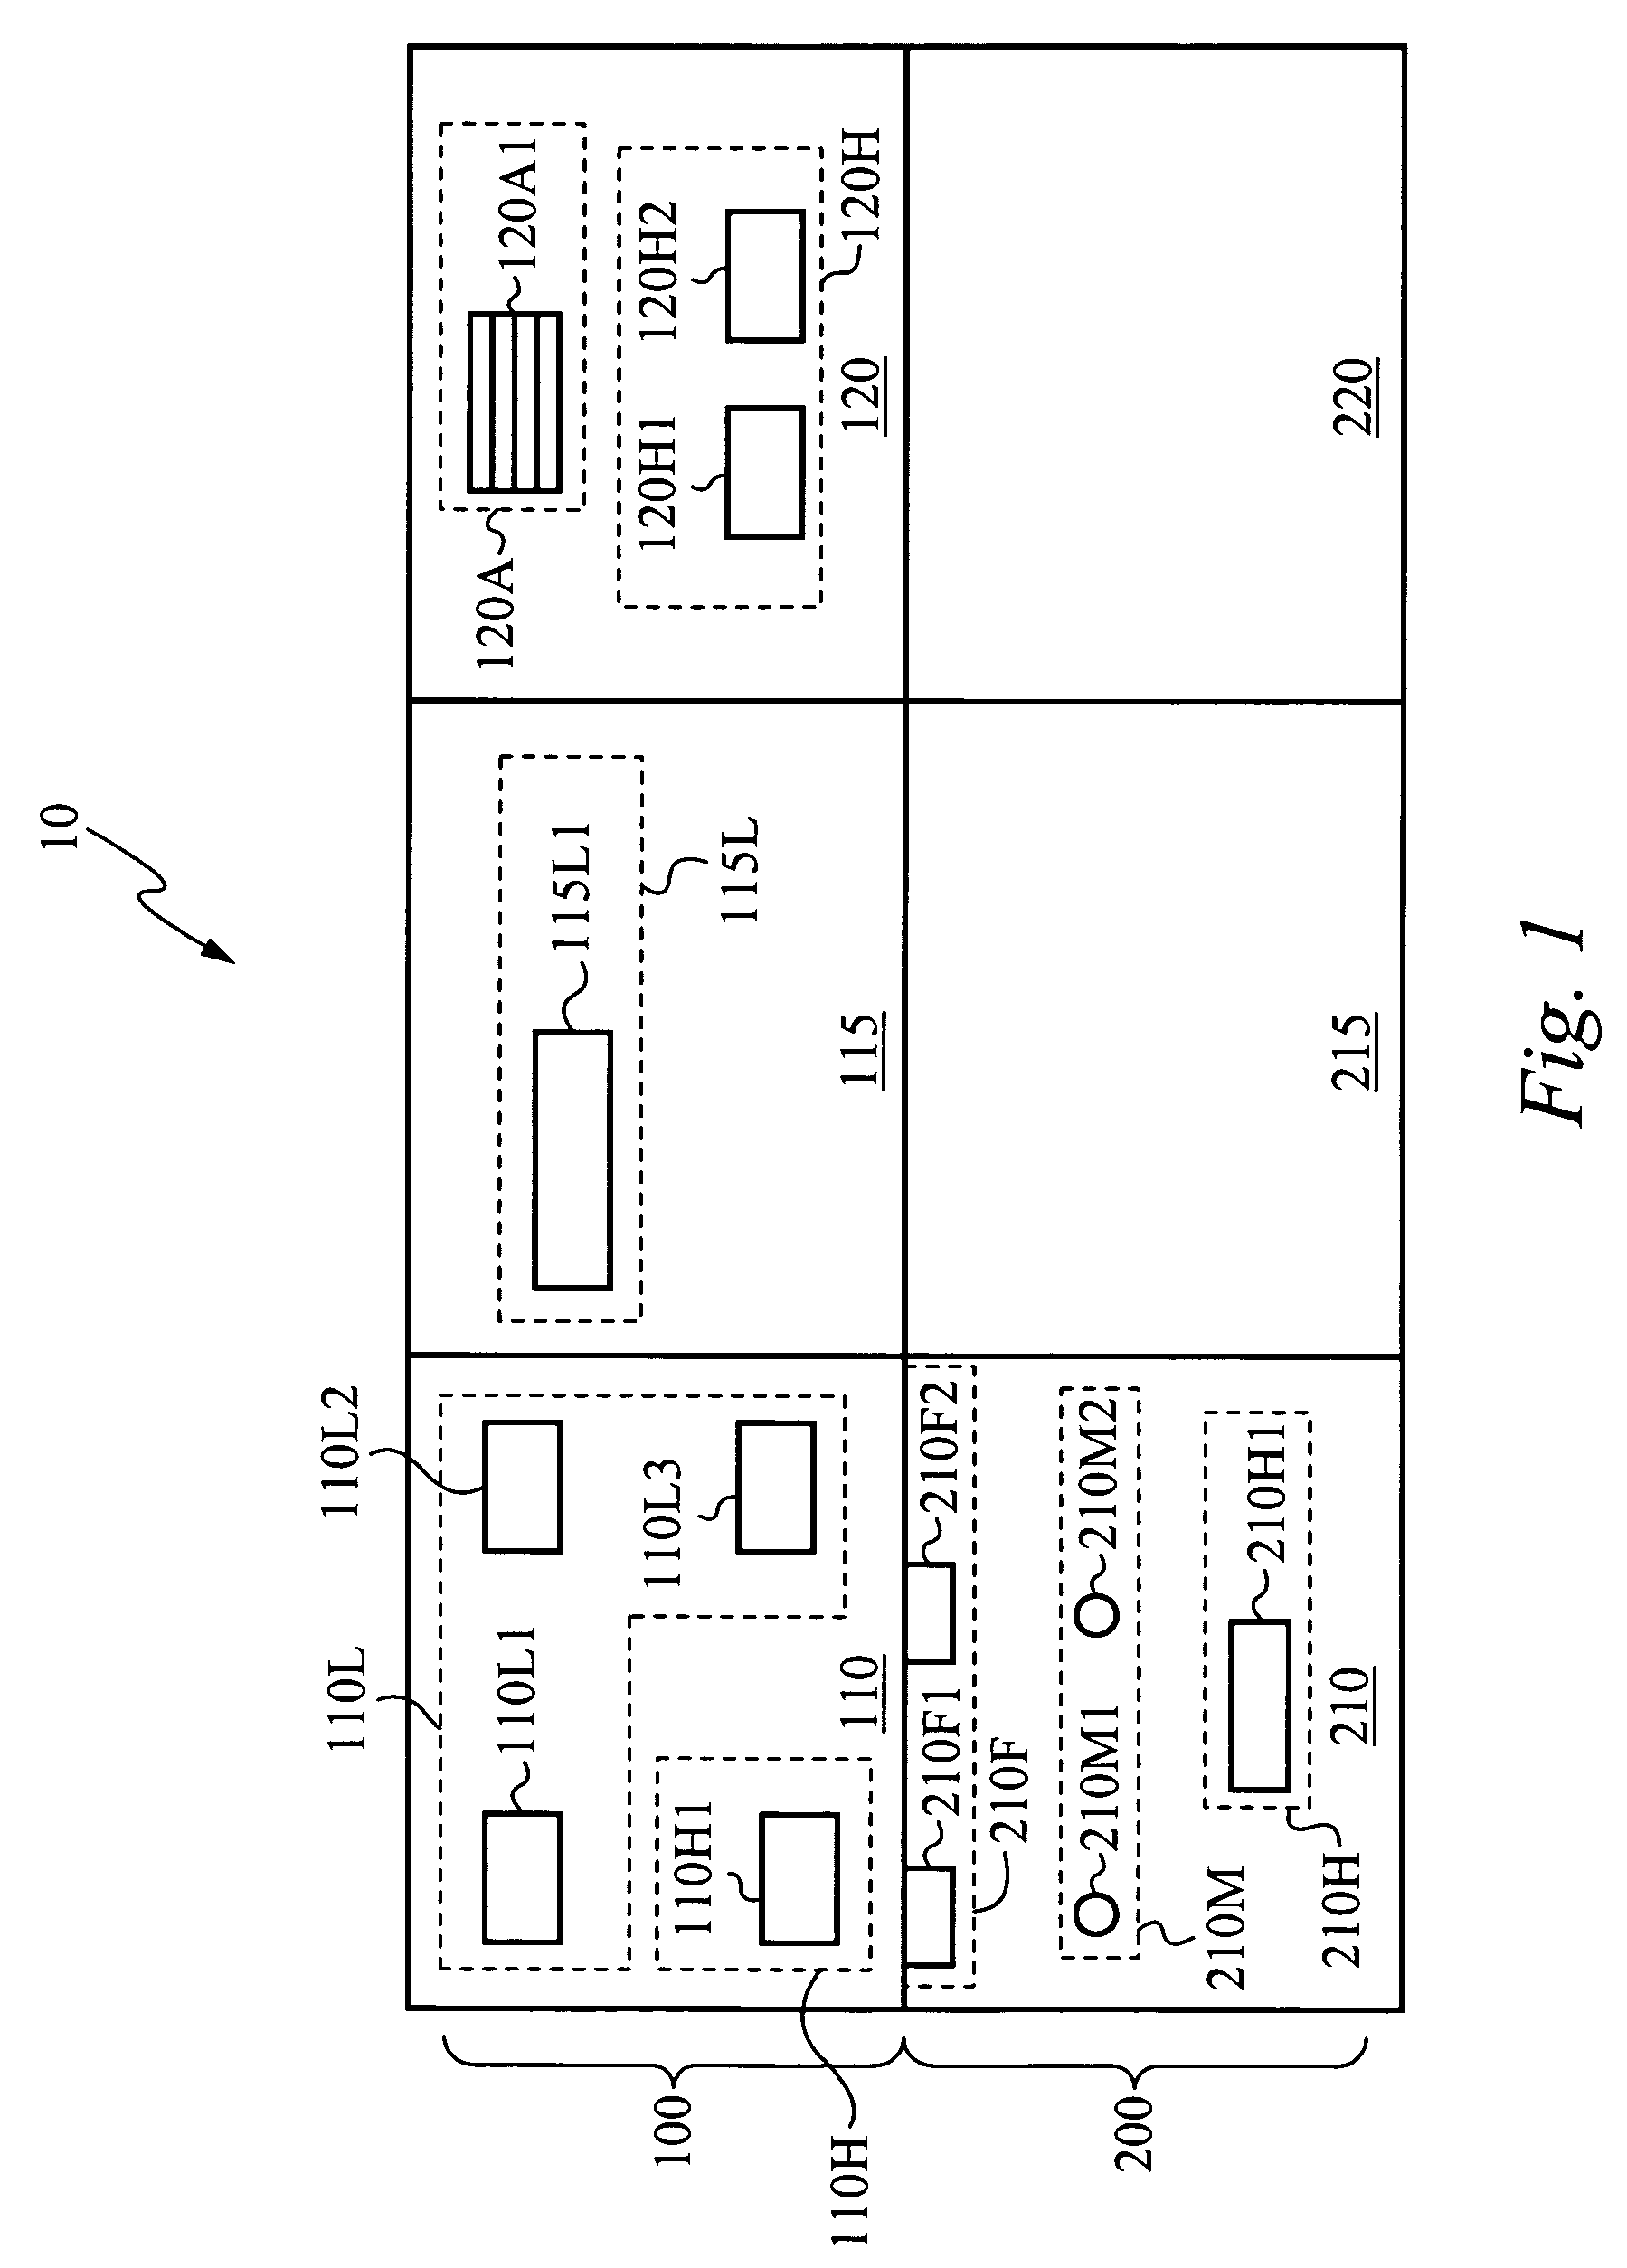 Location-based addressing lighting and environmental control system, device and method